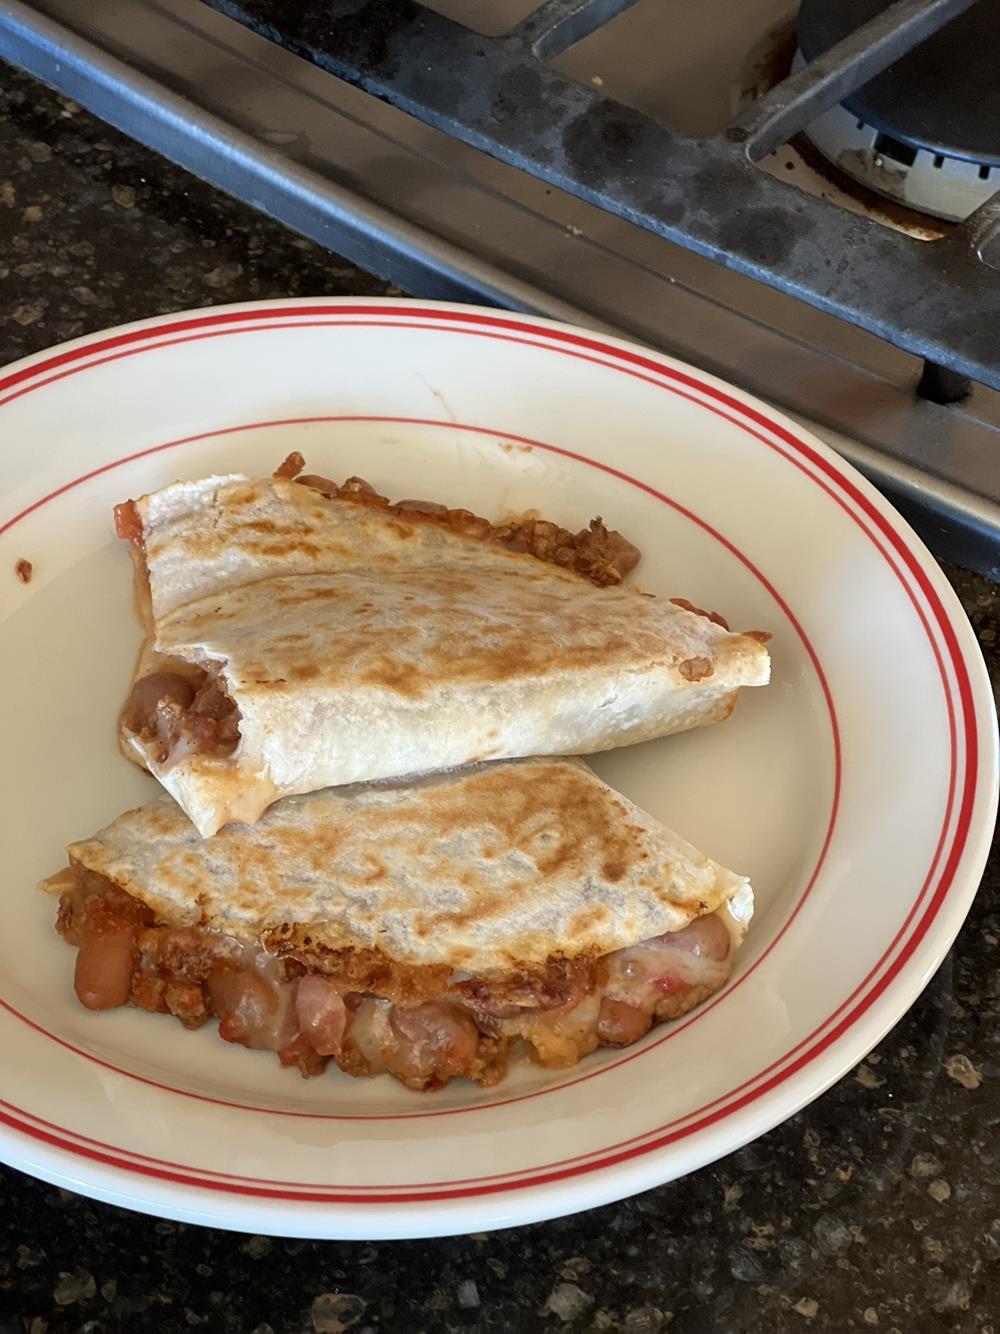 Chili Cheese Quesadillas on plate